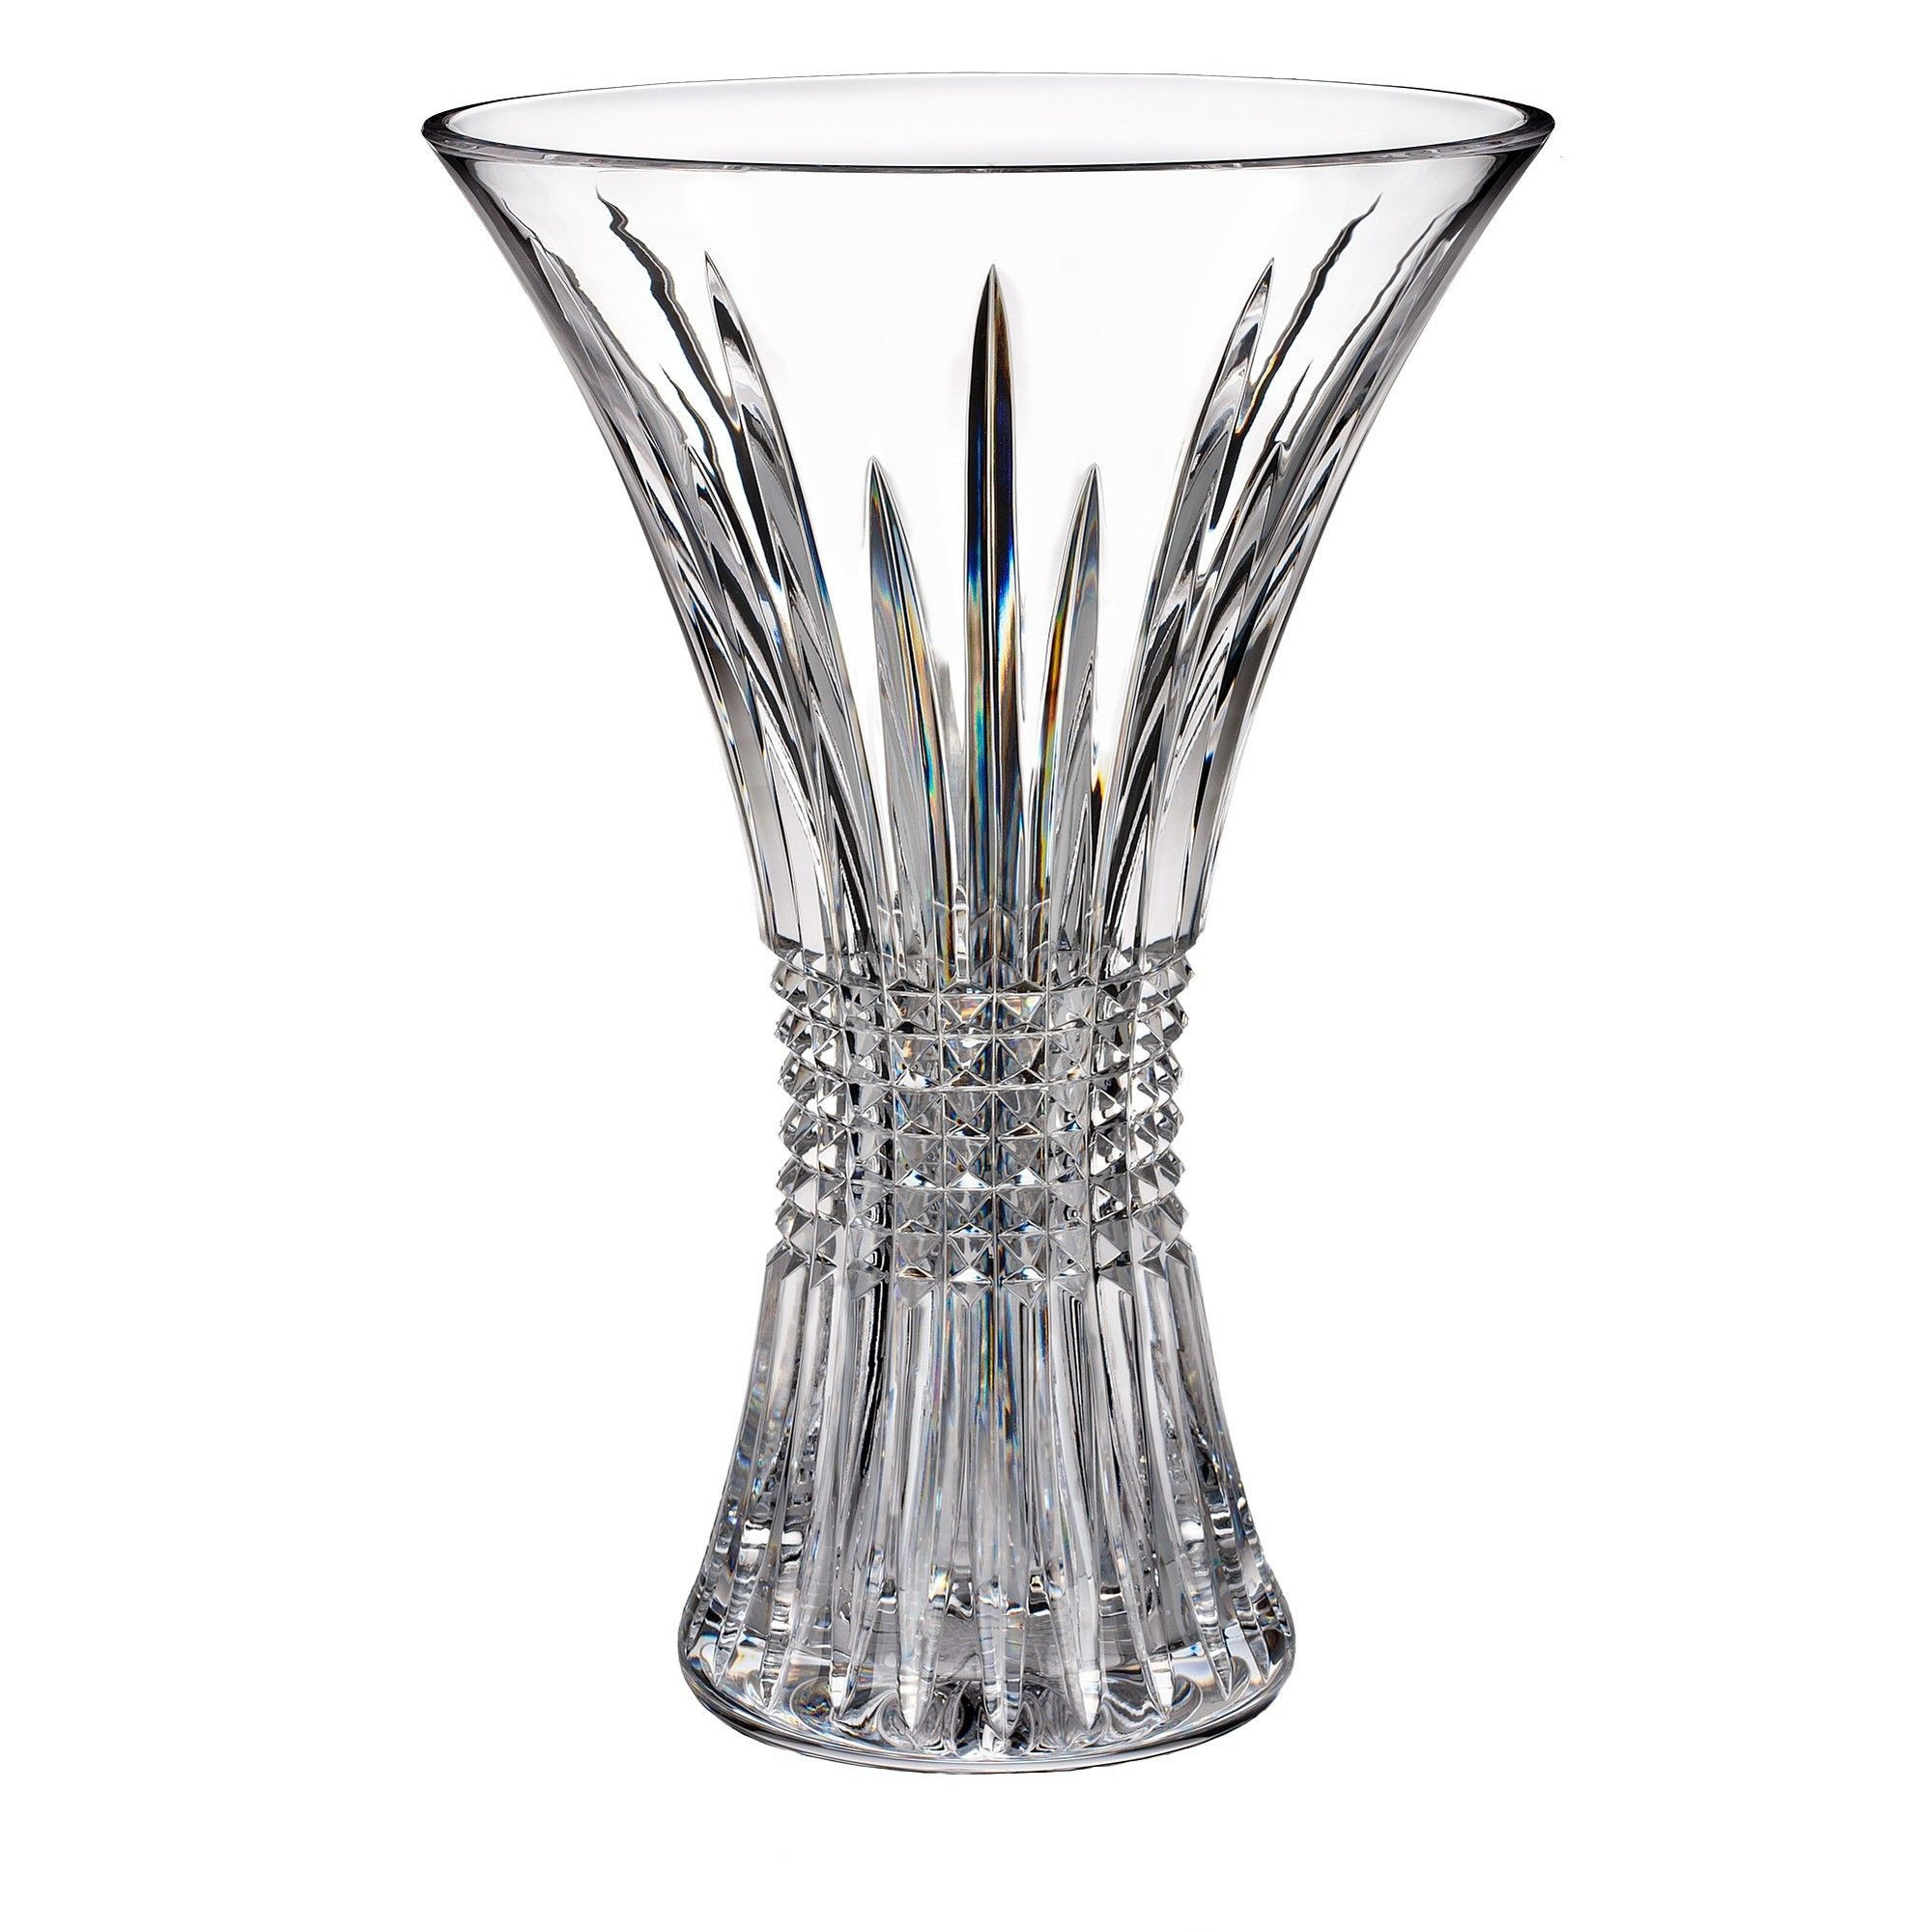 21 Ideal Mikasa Blossom Crystal Vase 2024 free download mikasa blossom crystal vase of lismore diamond vase for 213209d81145b837ad8020d8f4c74a3e